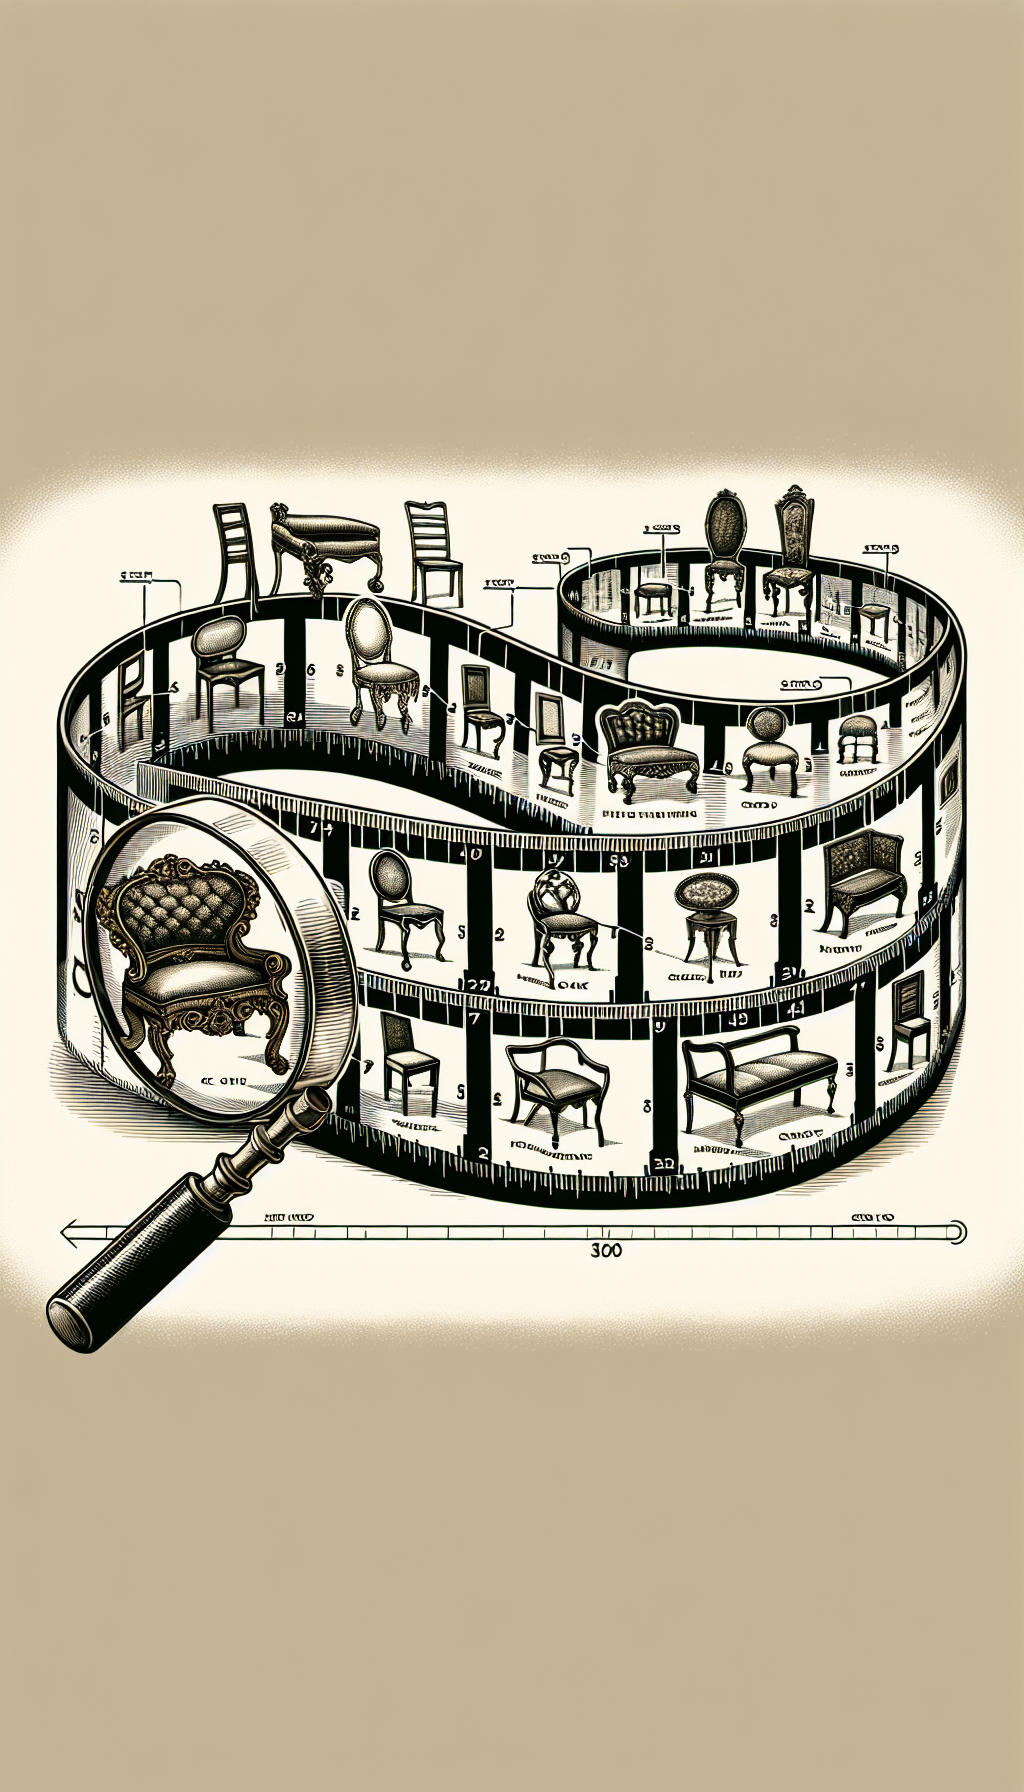 An illustrated timeline unfurls as a tape measure, each increment marking a distinct antique chair style corresponding to its era. A magnifying glass hovers over the timeline, symbolically "decoding" features like leg silhouettes, back shapes, and ornate carvings that distinguish each period, from Baroque to Art Nouveau, transforming the art of identification into a visual journey through the history of chair design.